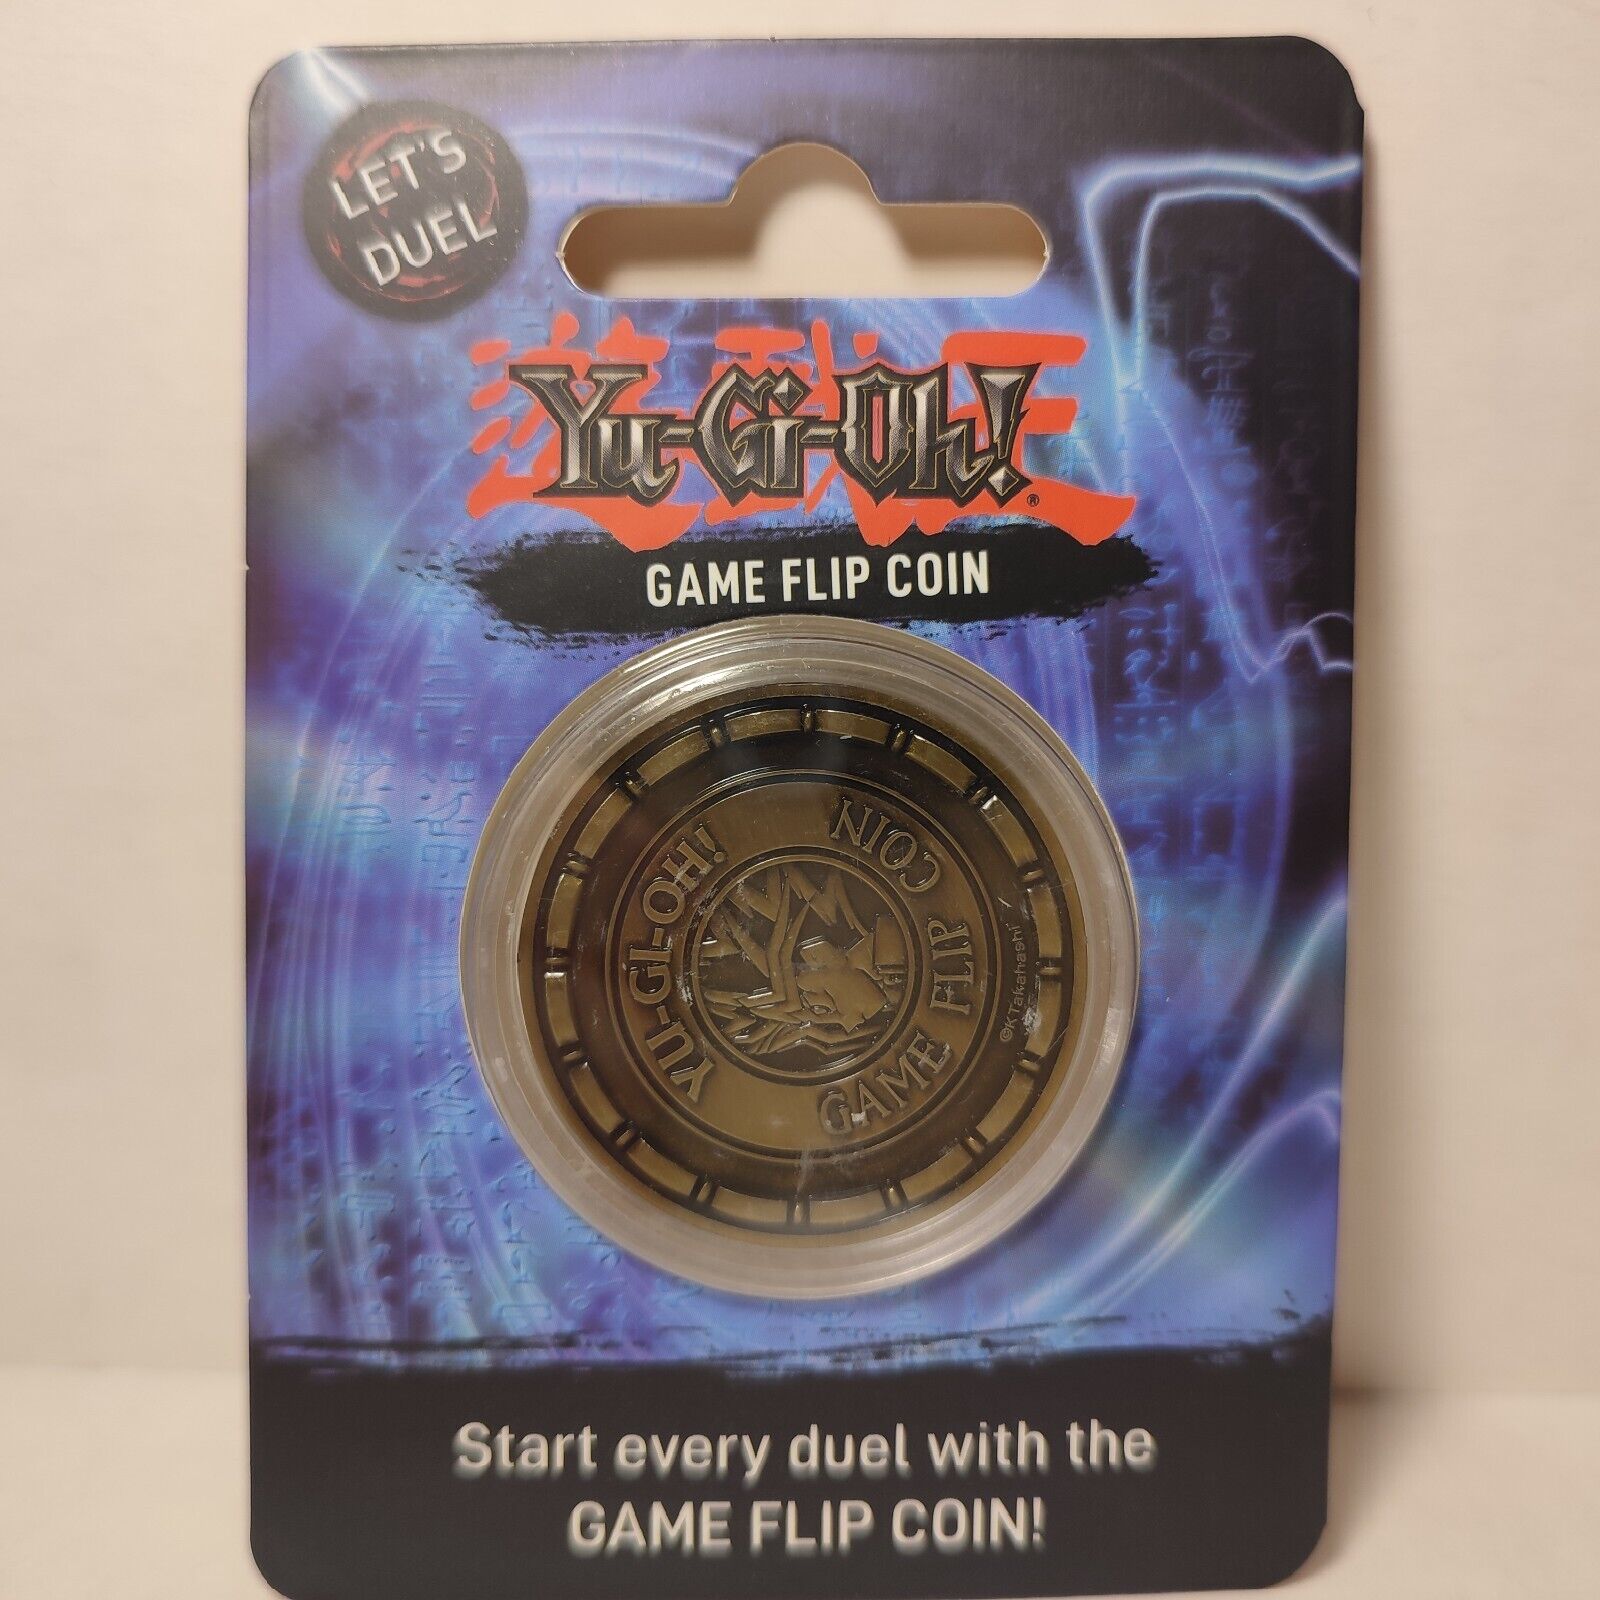 Yugioh Its Time To Duel Game Flip Coin Official Konami Collectible Product